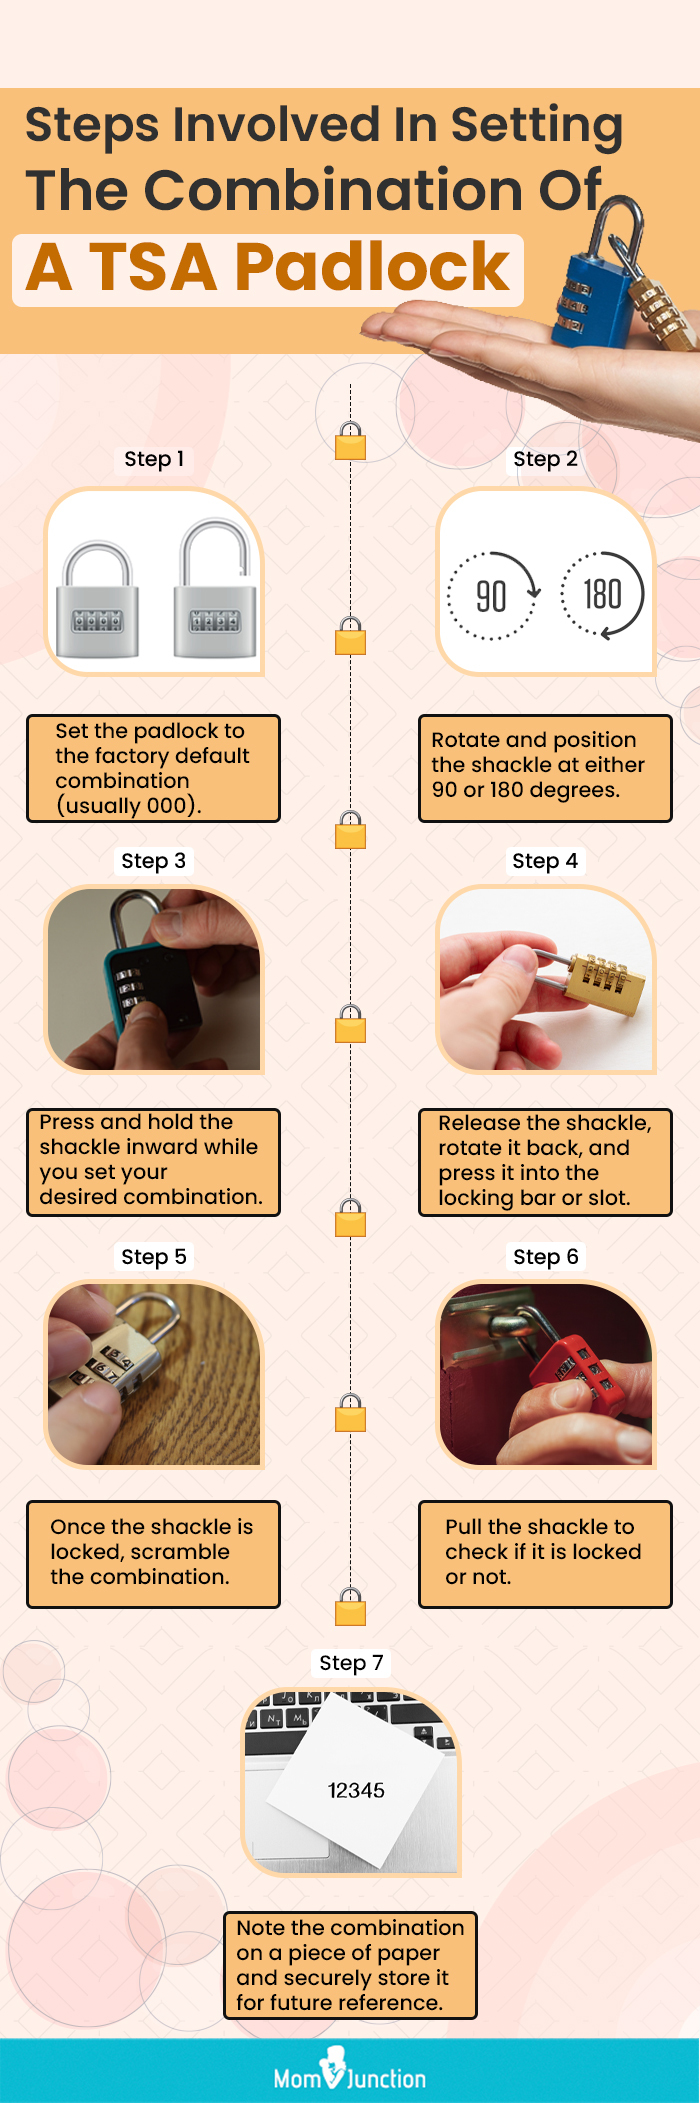 Steps Involved In Setting The Combination Of A TSA Padlock (infographic)